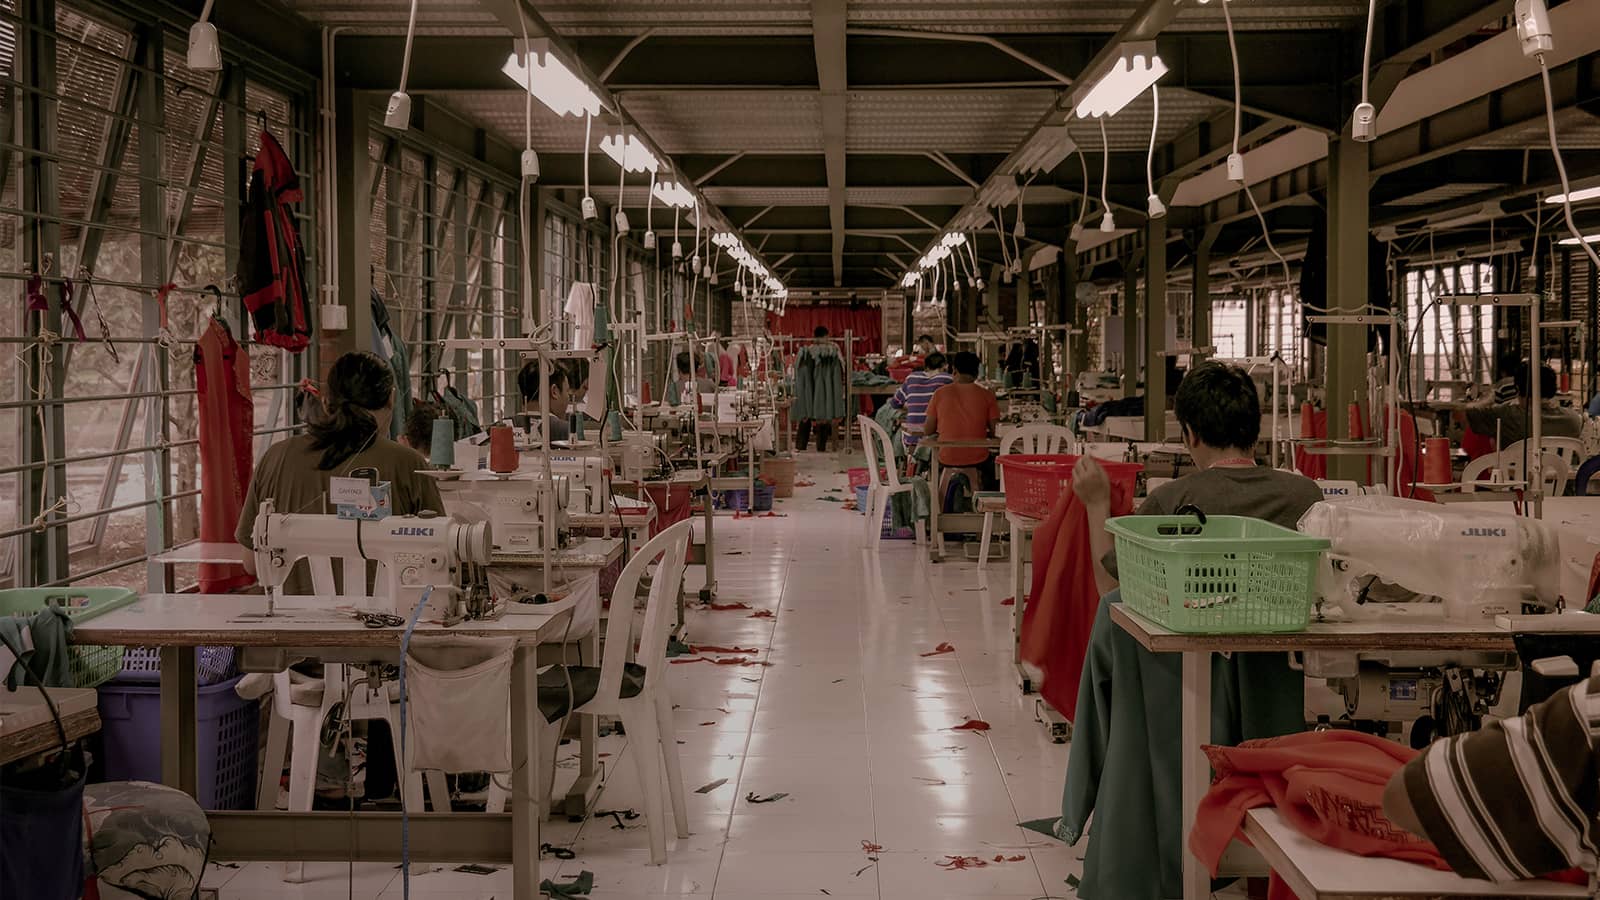 Inside look into garment factory